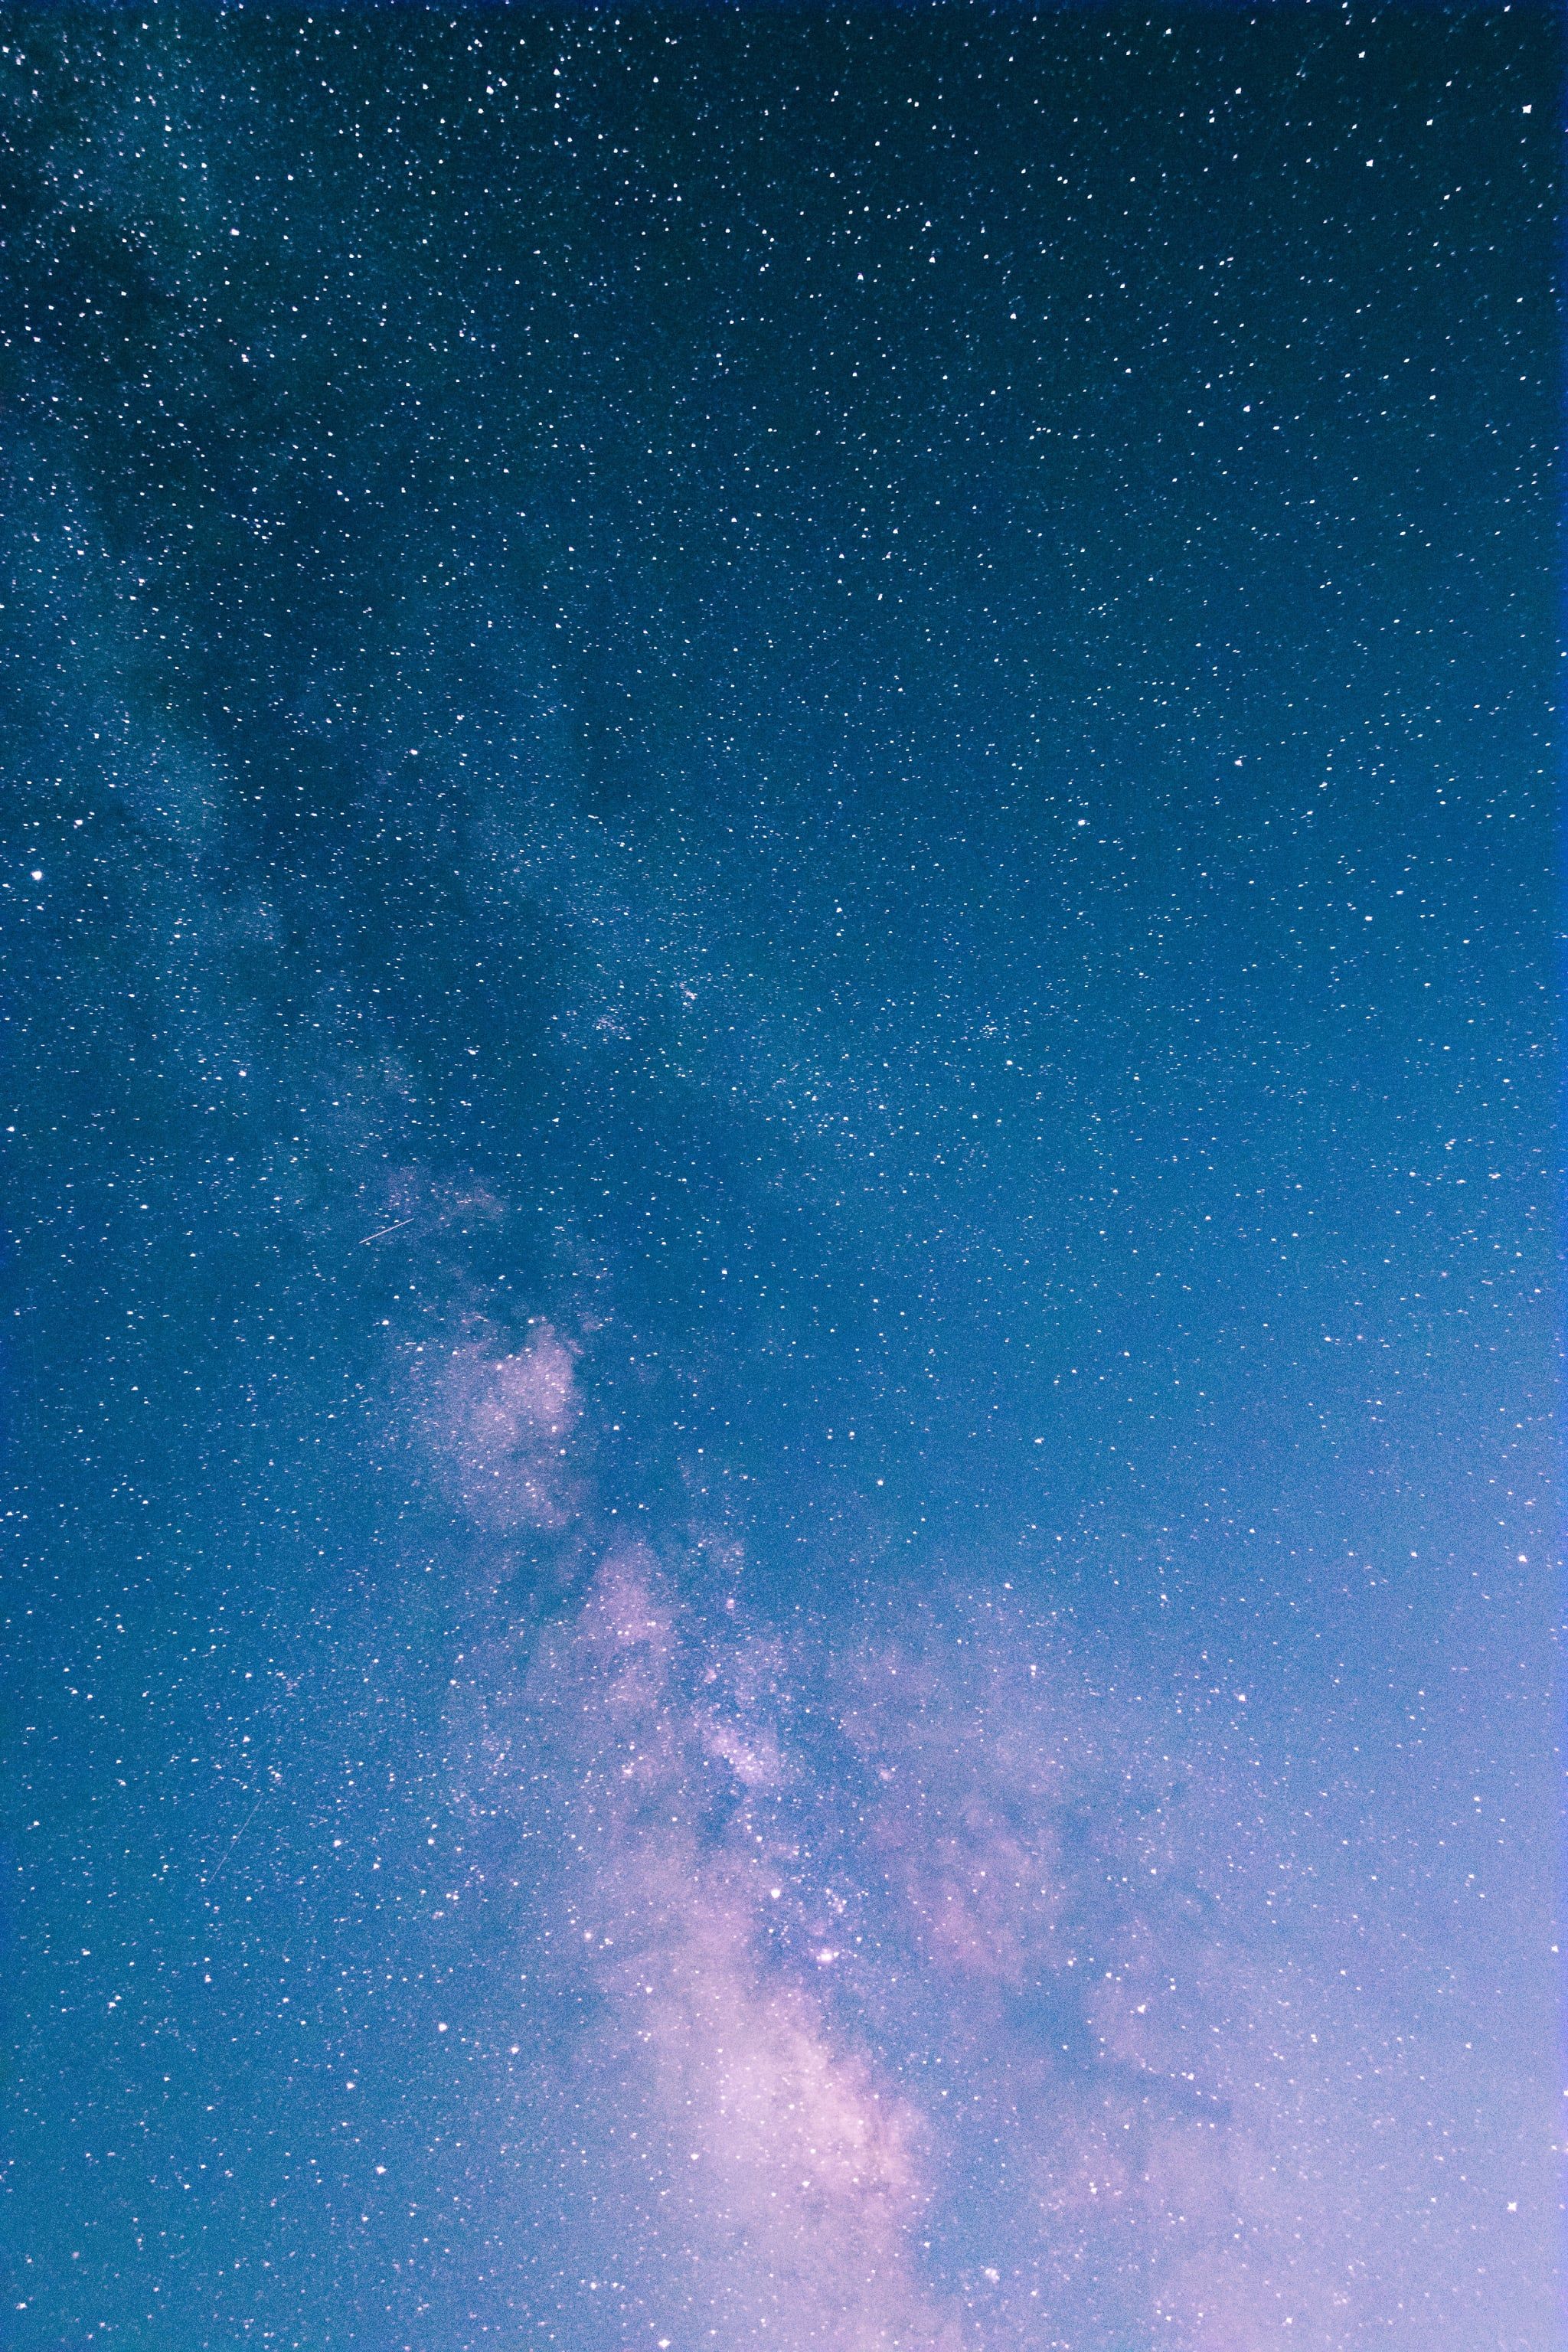 Pastel Sky iPhone Wallpaper. The Best iOS 14 Wallpaper Ideas That'll Make Your Phone Look Aesthetically Pleasing AF